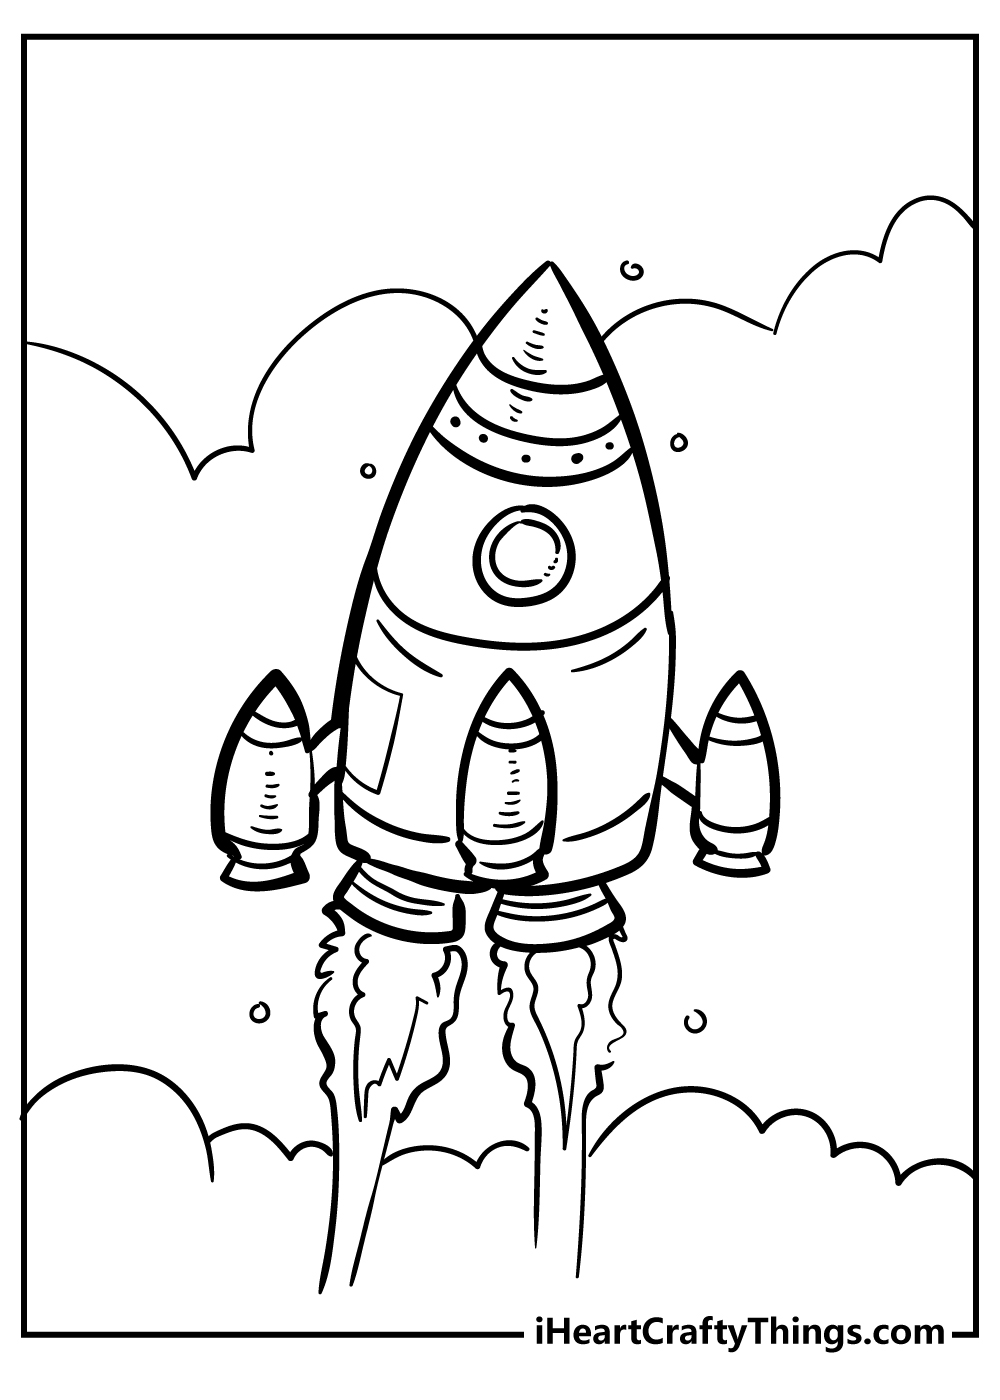 Rocket Coloring Book for adults free download